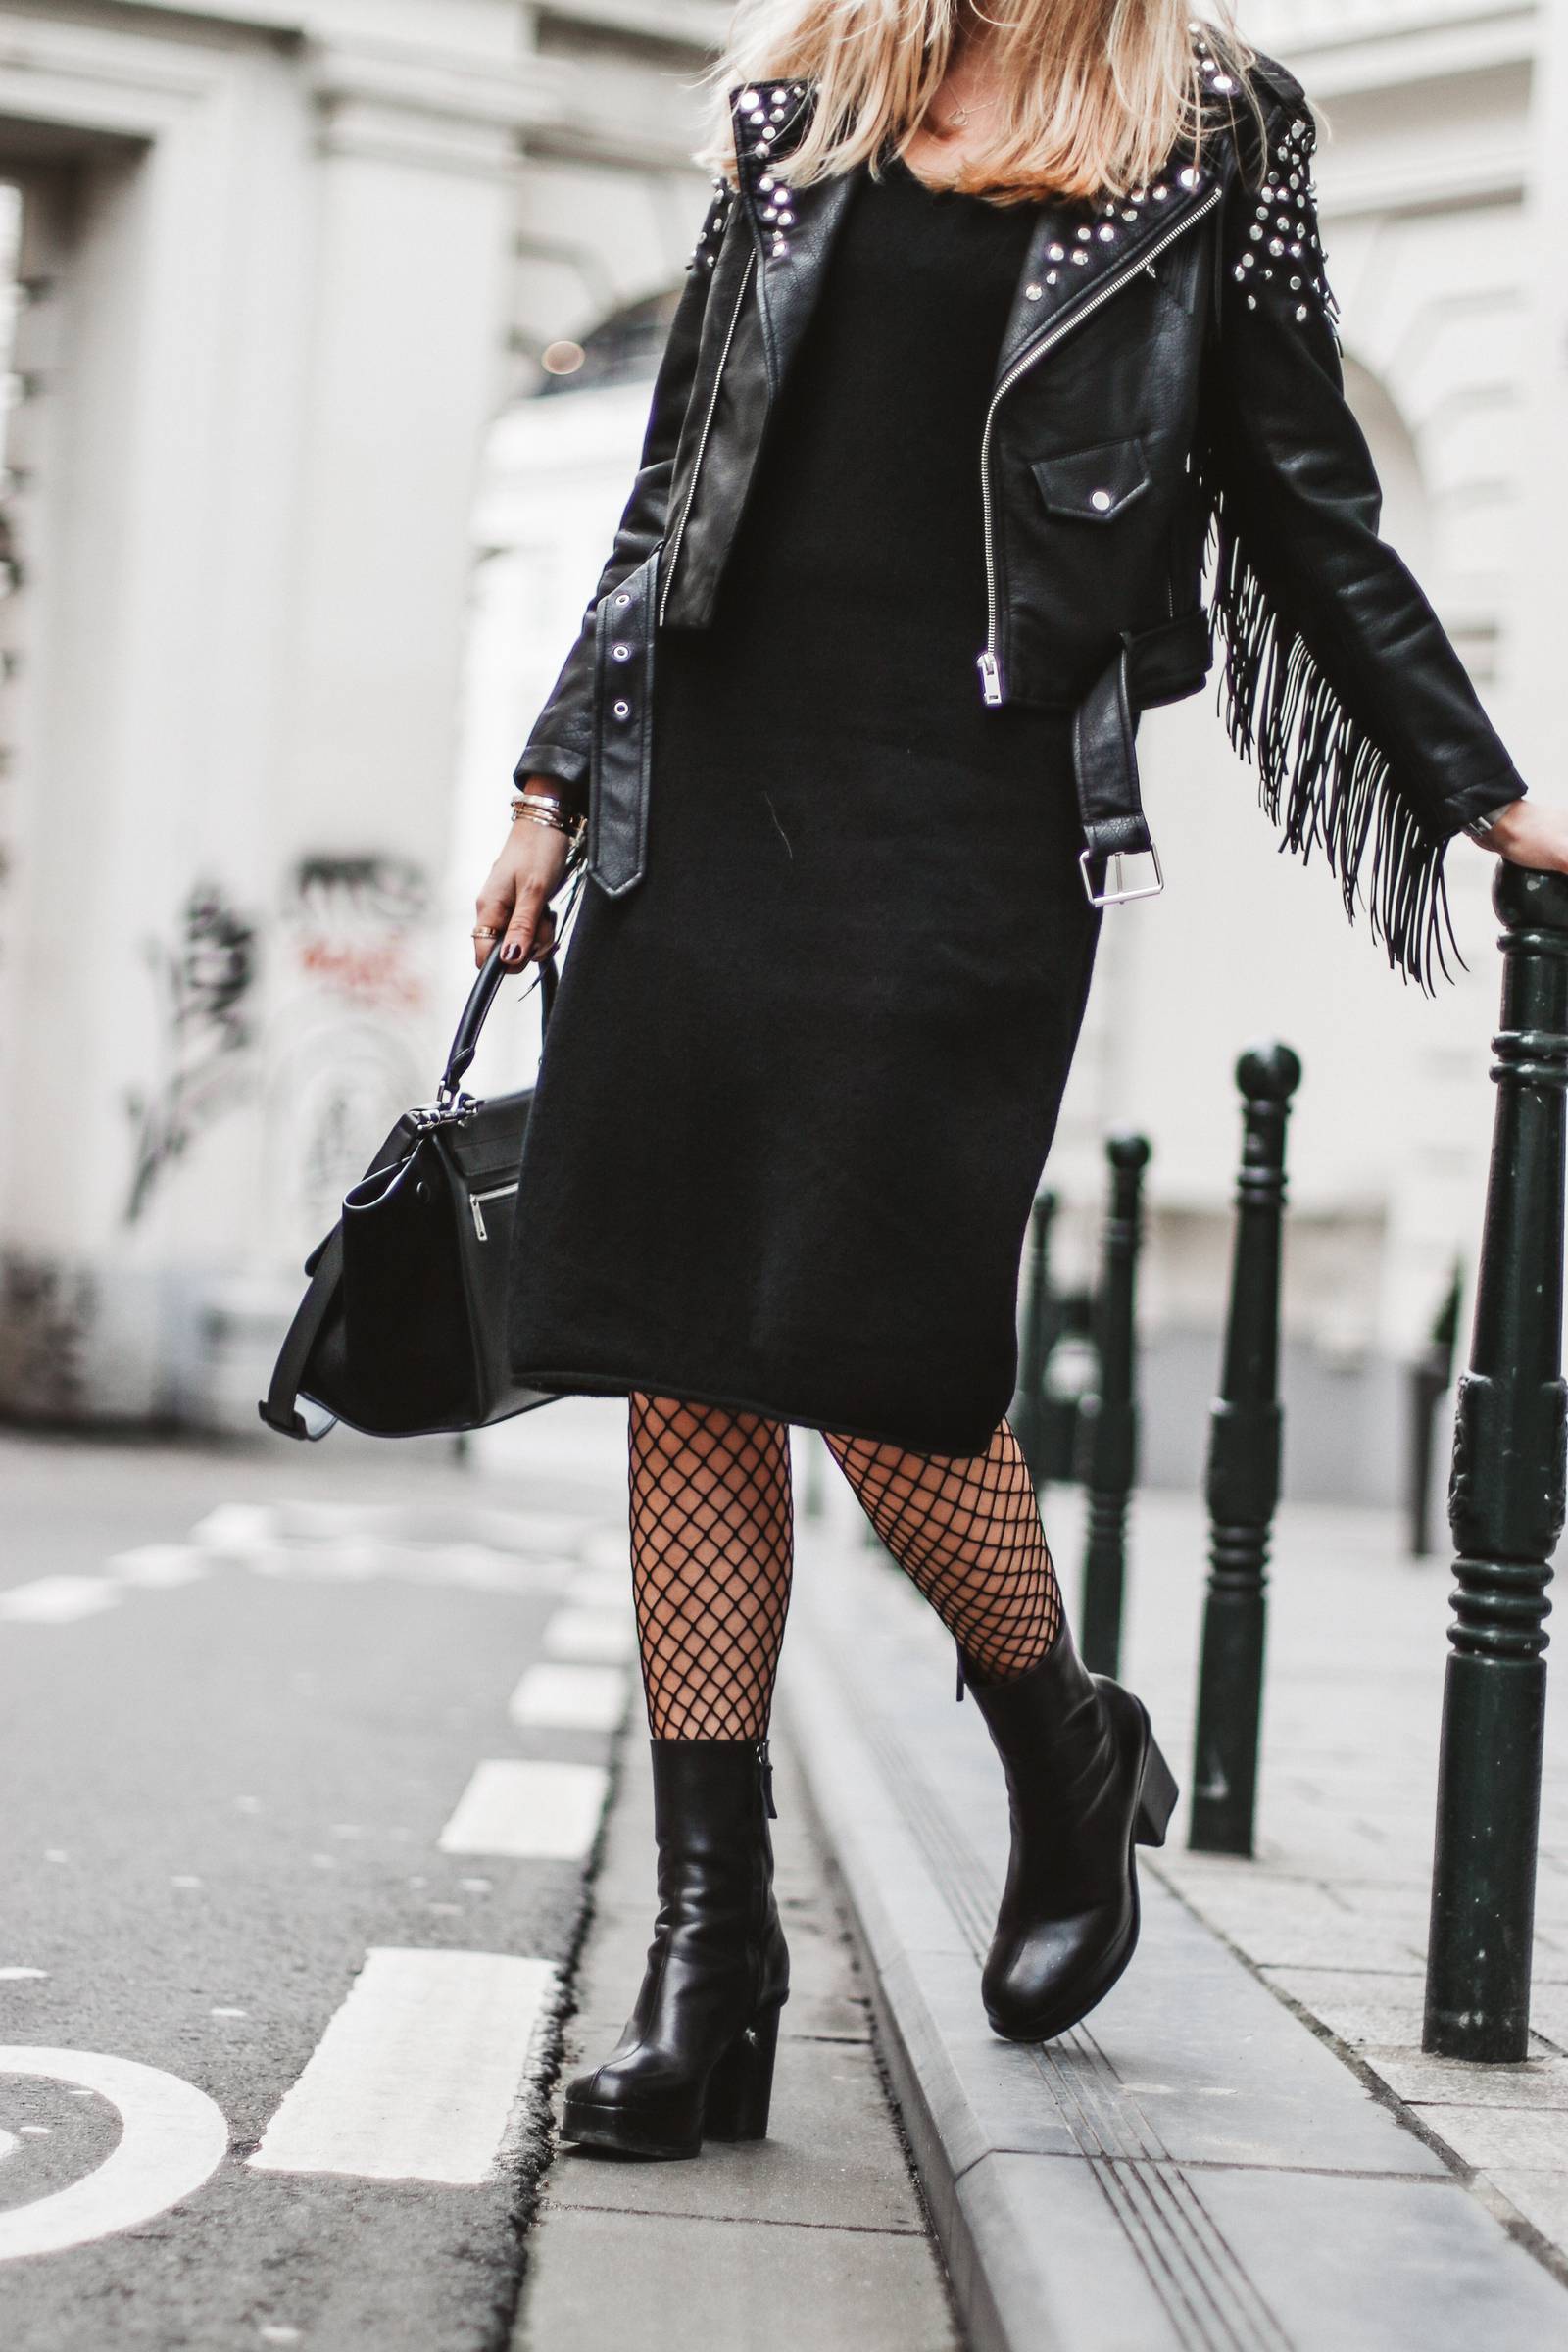 Fringed jacket, fishnet tights and Céline trapeze bag